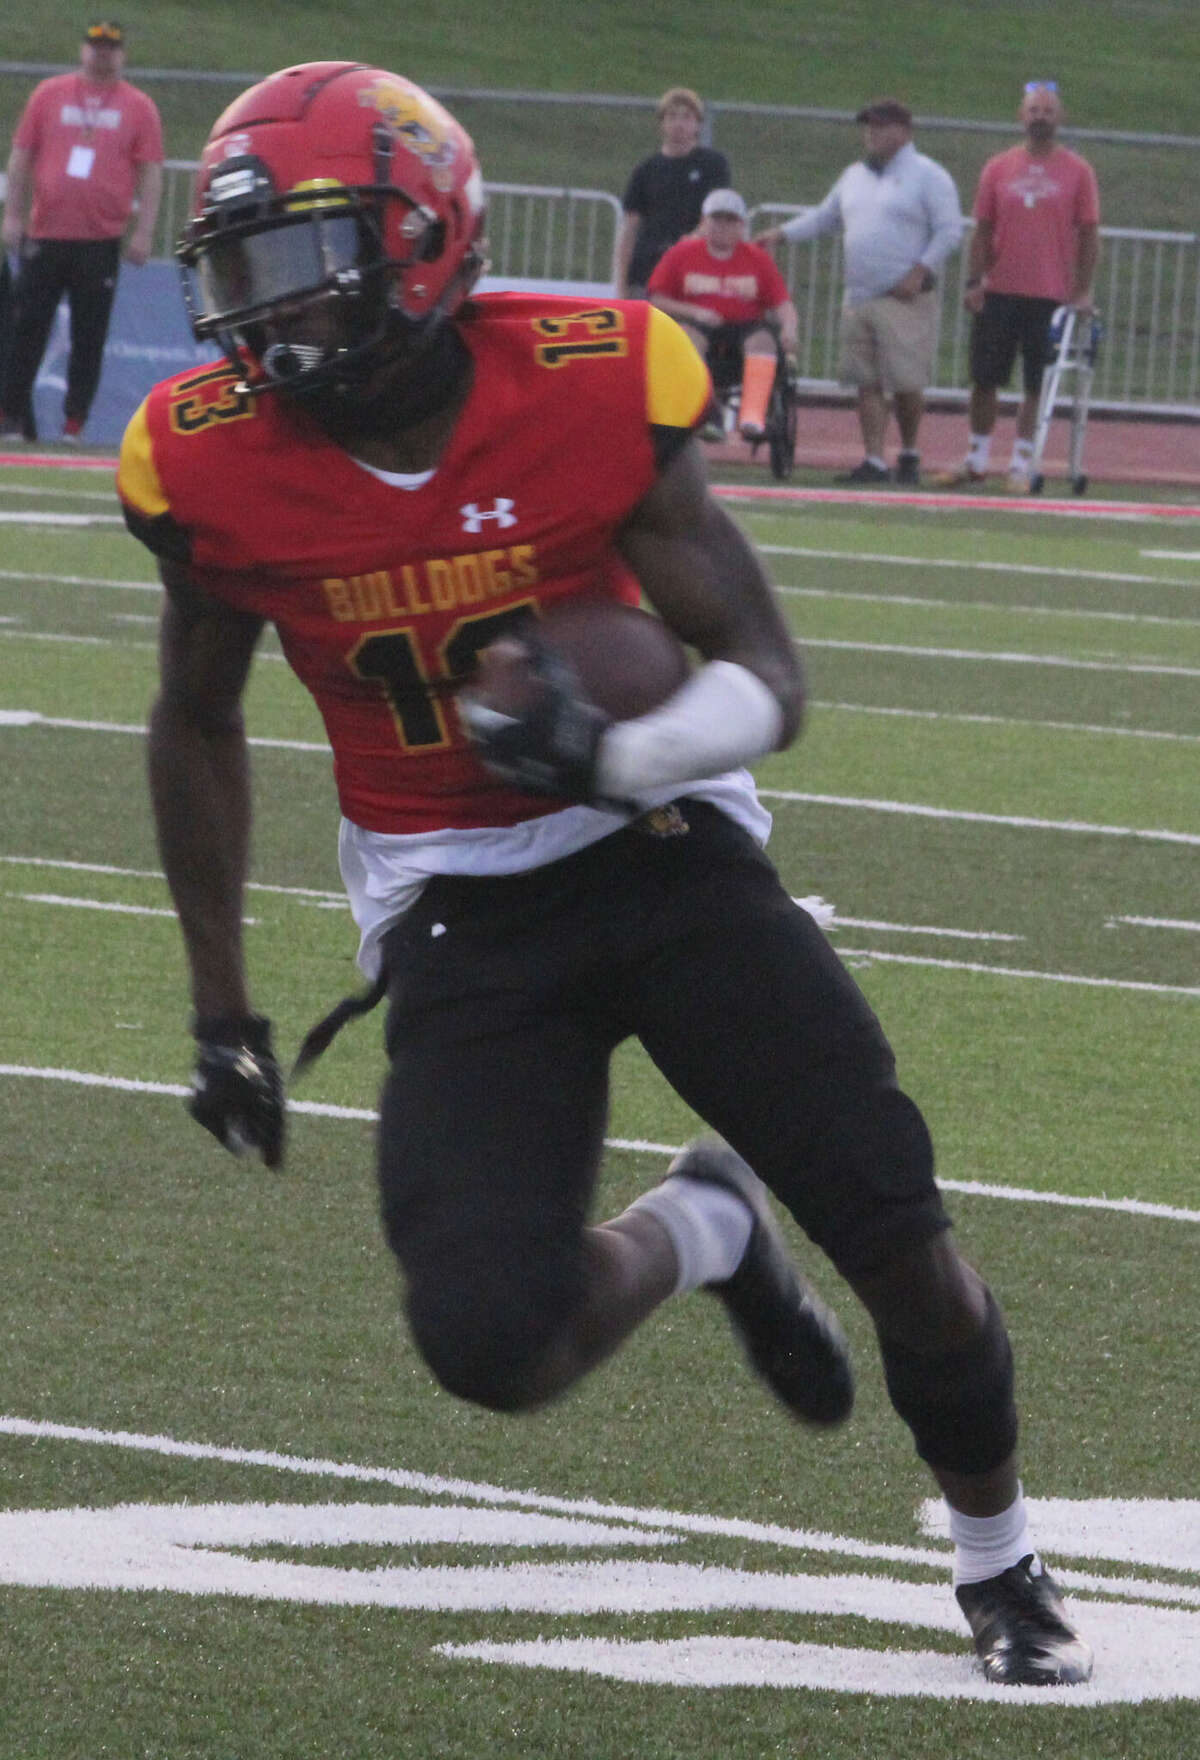 C.J. Jefferson is expected to be a major threat for Ferris football at wide receiver.